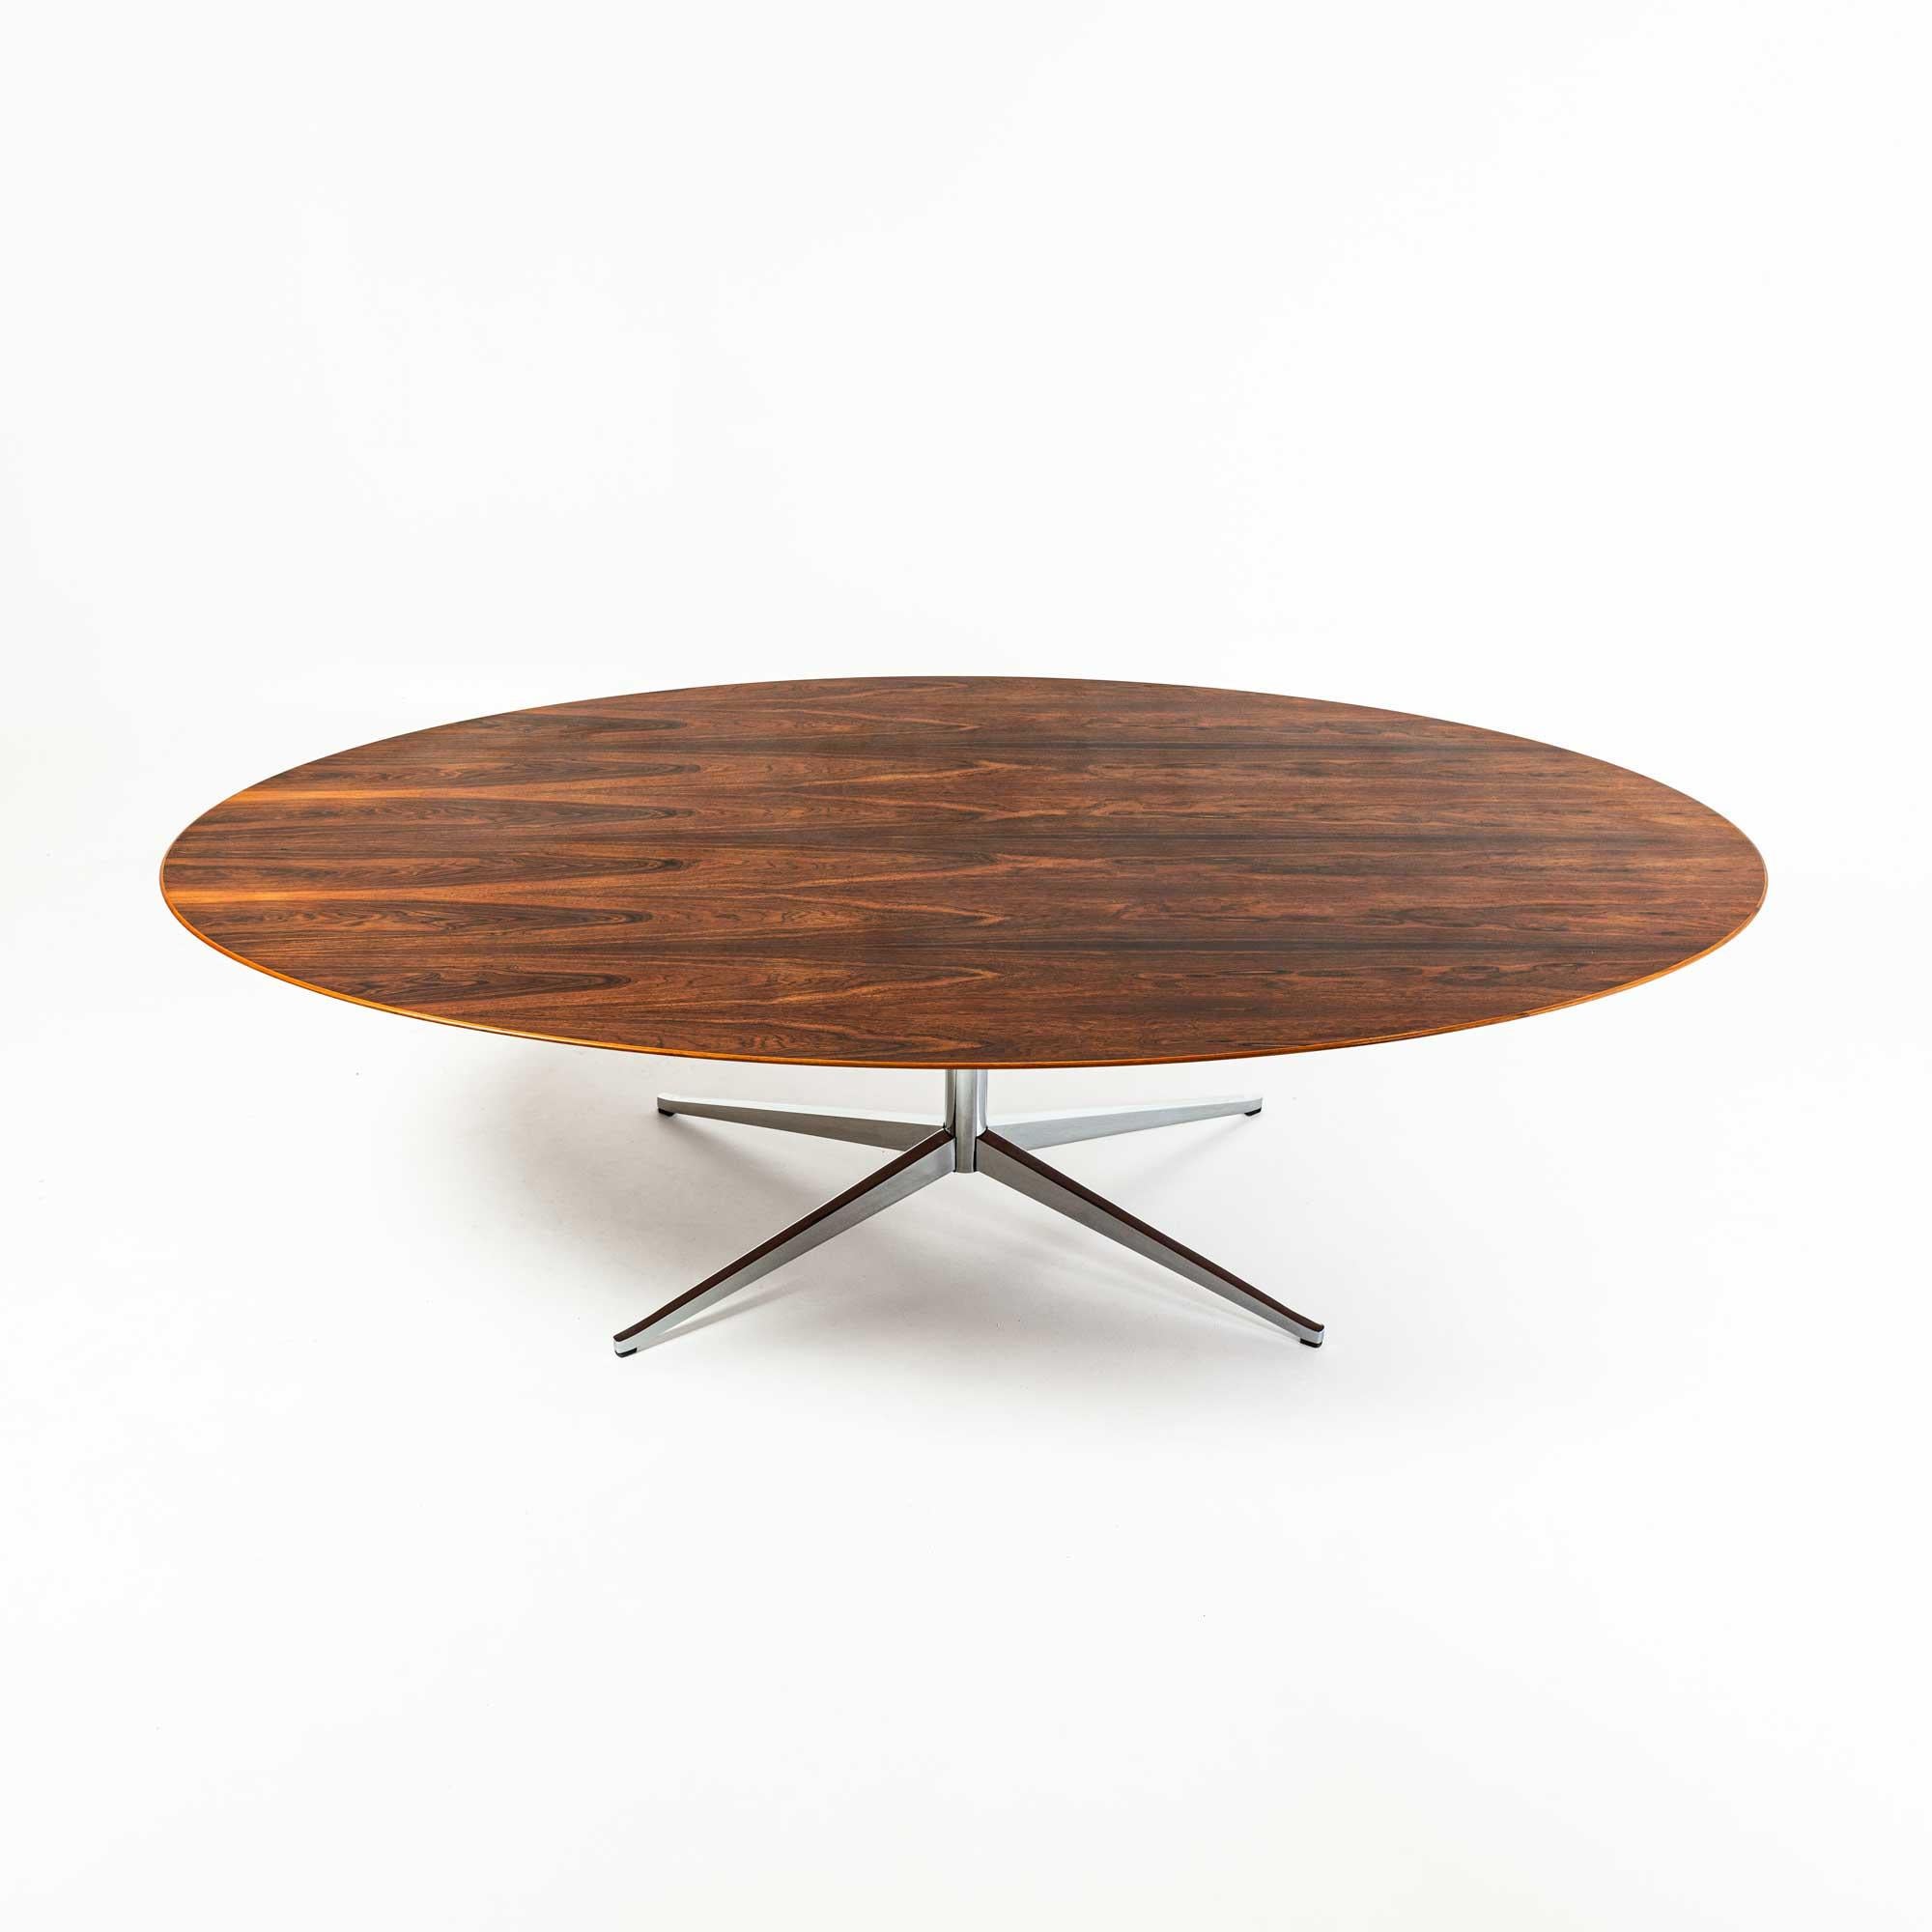 A 96 inch oval Florence Knoll desk/dining table for Knoll International, 1970s, with rosewood veneer top, in overall great condition.

The legs have been rechrome and the table top lightly refinished.